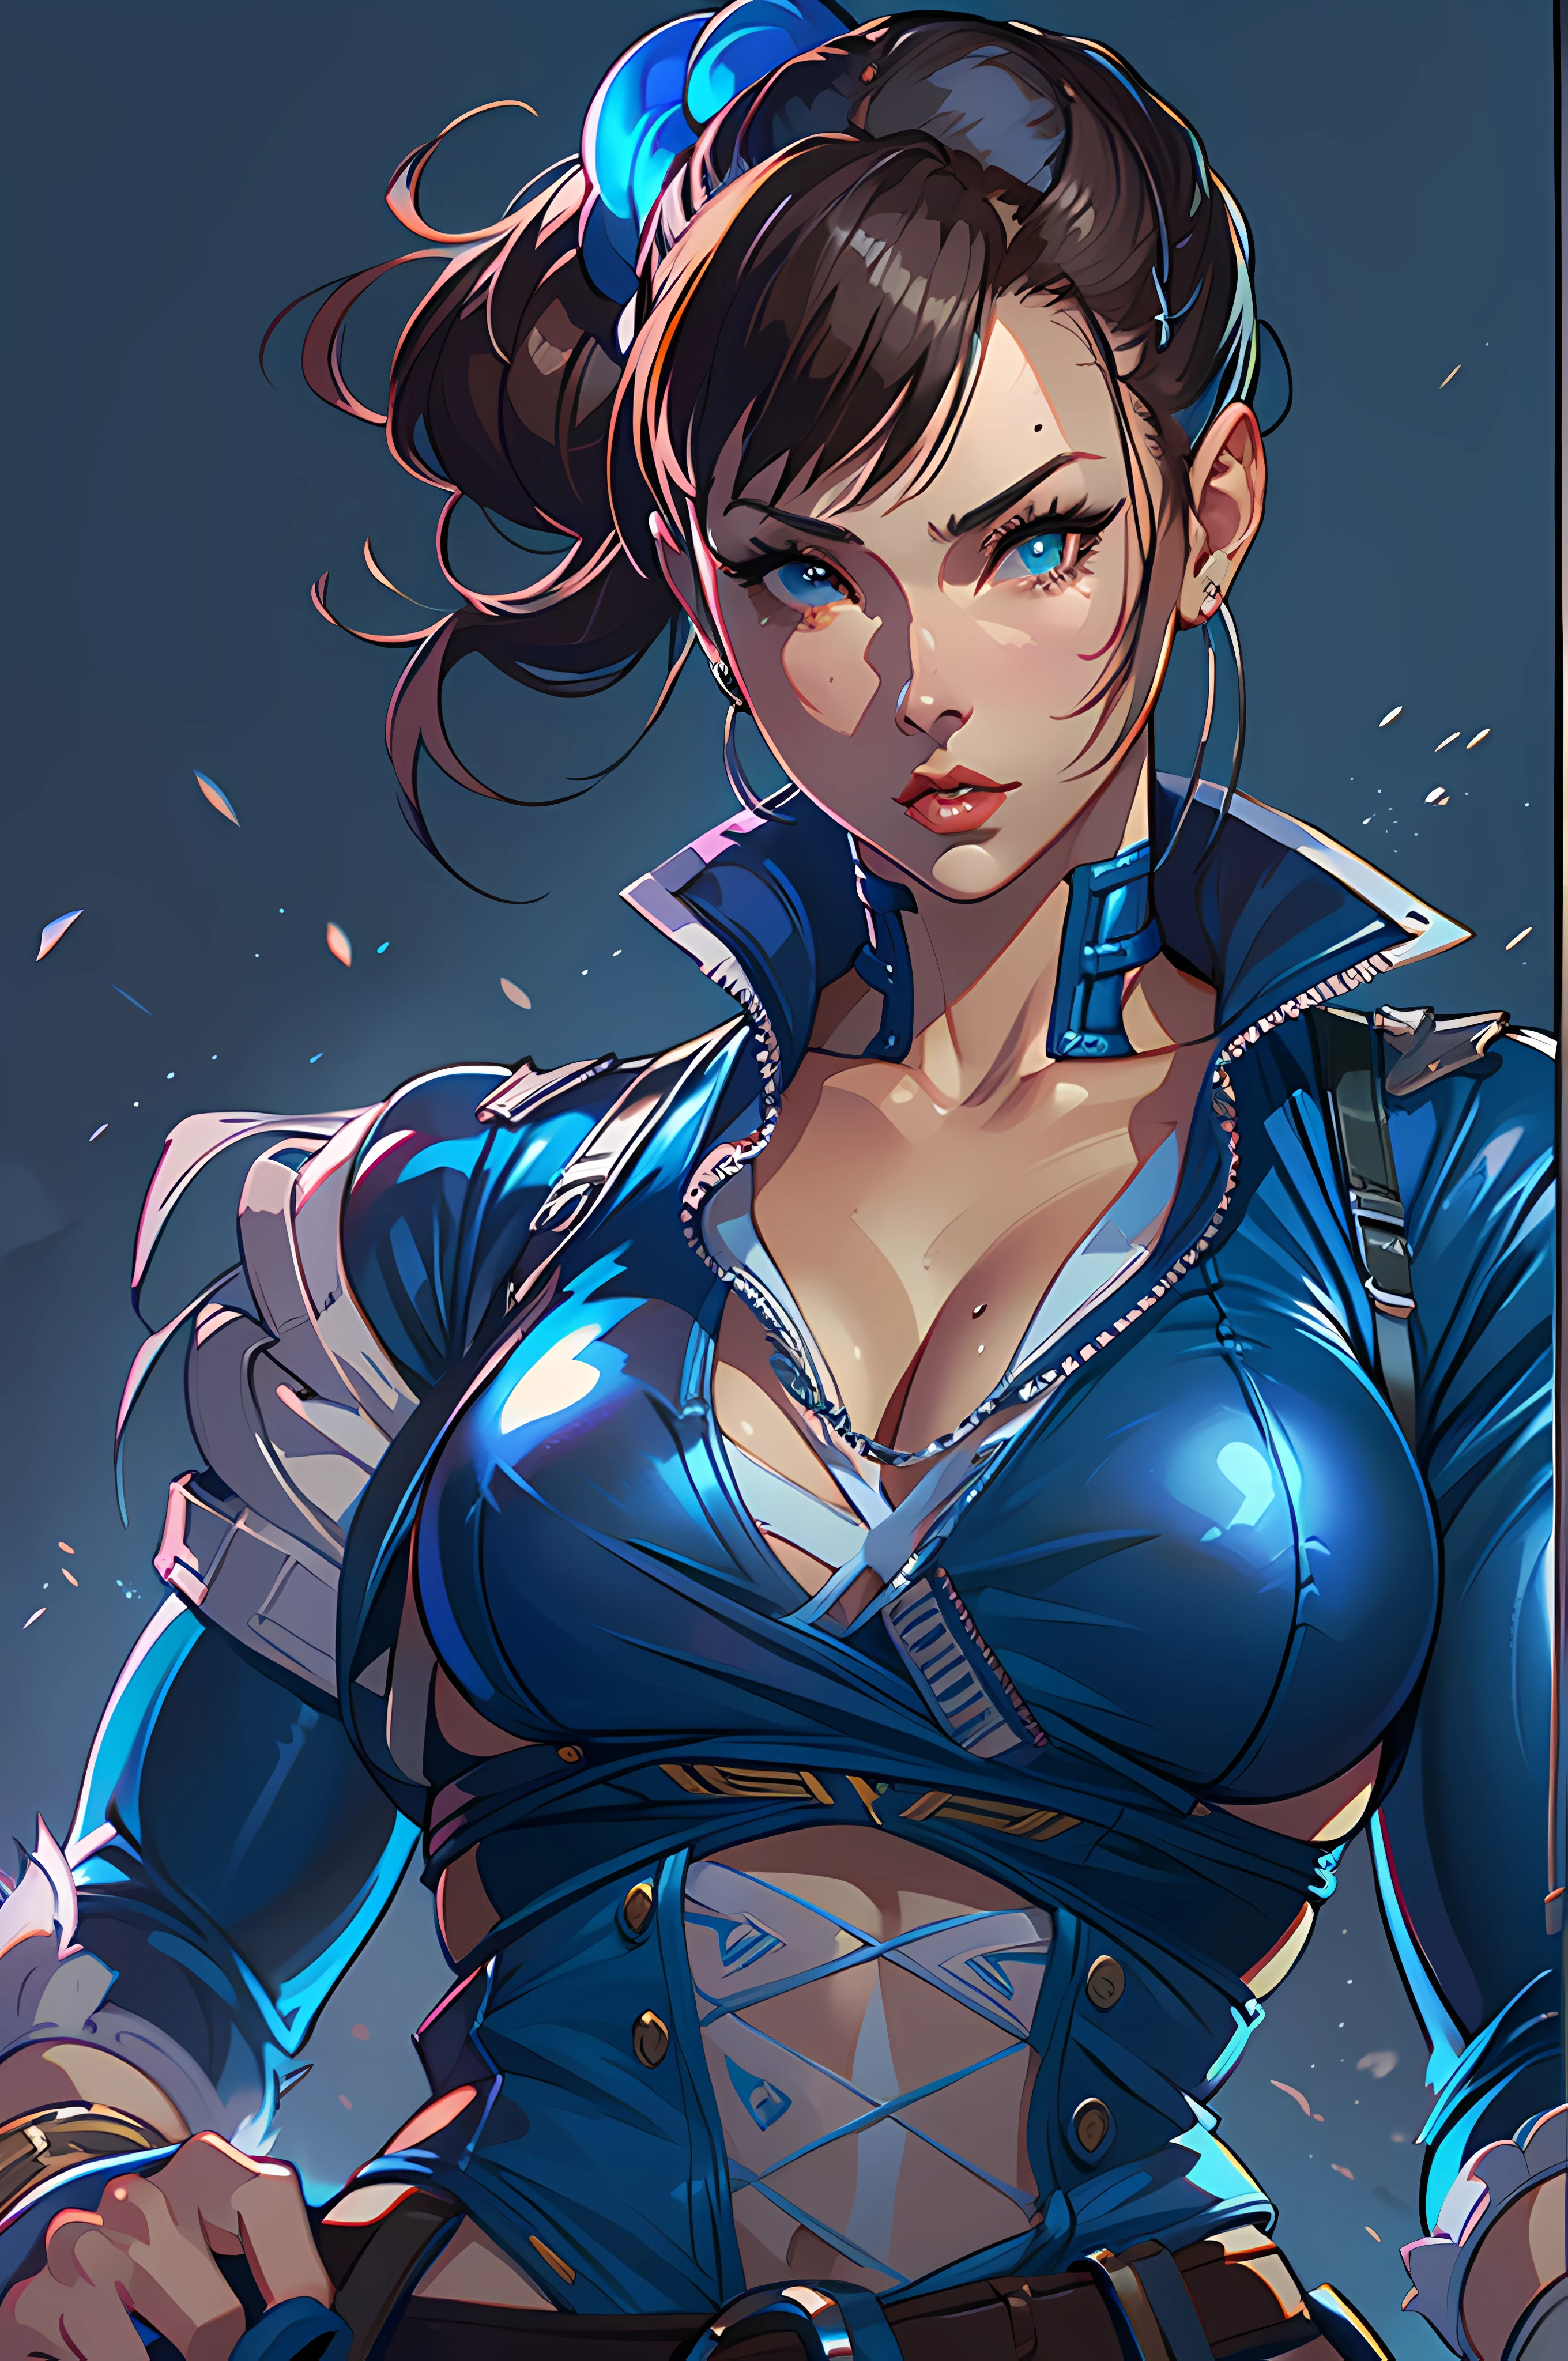 a woman in a blue outfit and boots is posing, character from king of fighters, chun-li, chun - li, chun li, portrait of chun - li, cutesexyrobutts, fighting game character, badass pose, glamorous jill valentine, cammy, as a character in tekken, portrait of chun li, fighter pose, sexy pudica pose gesture